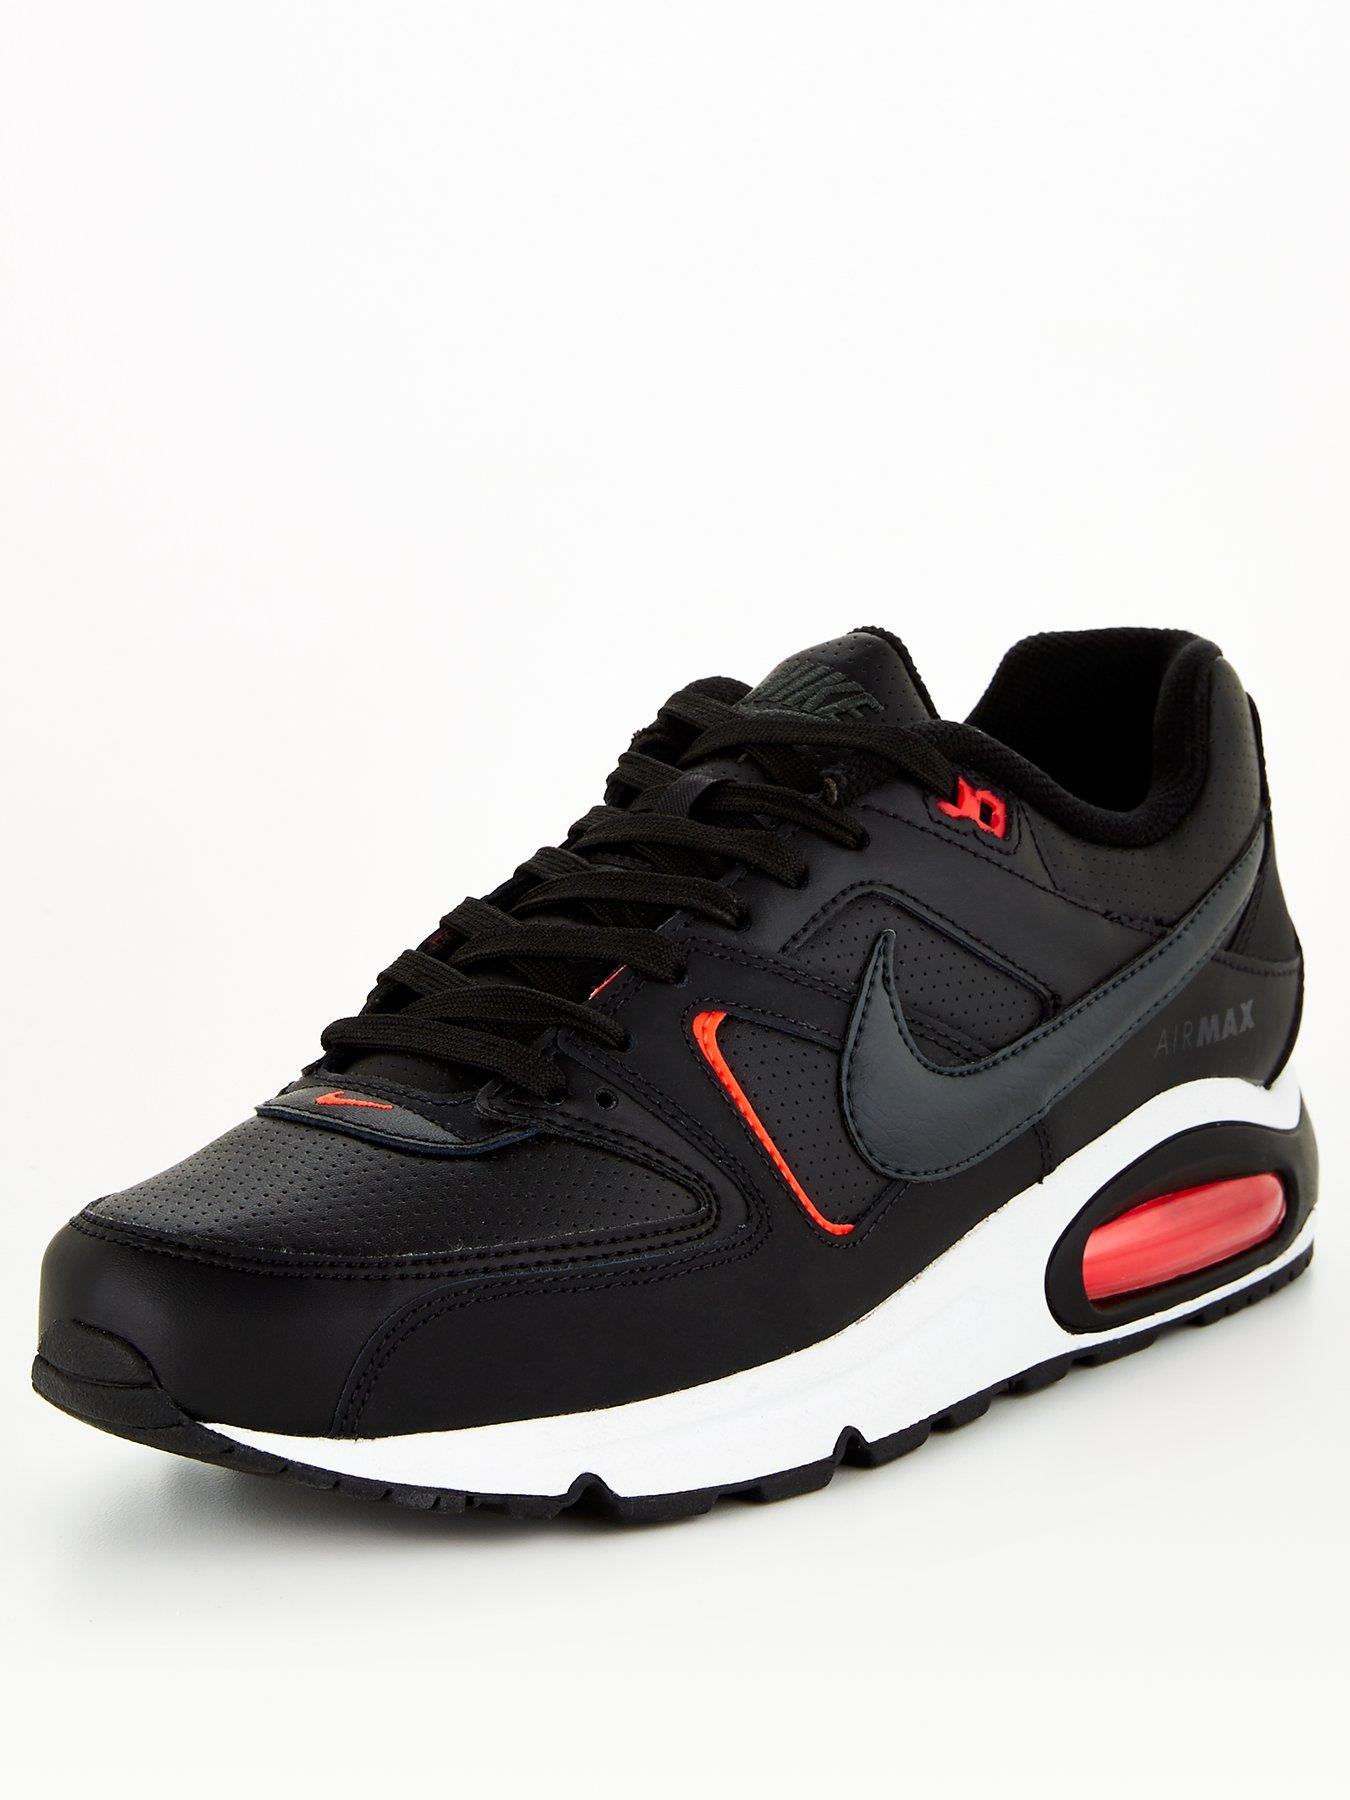 nike air max command black red